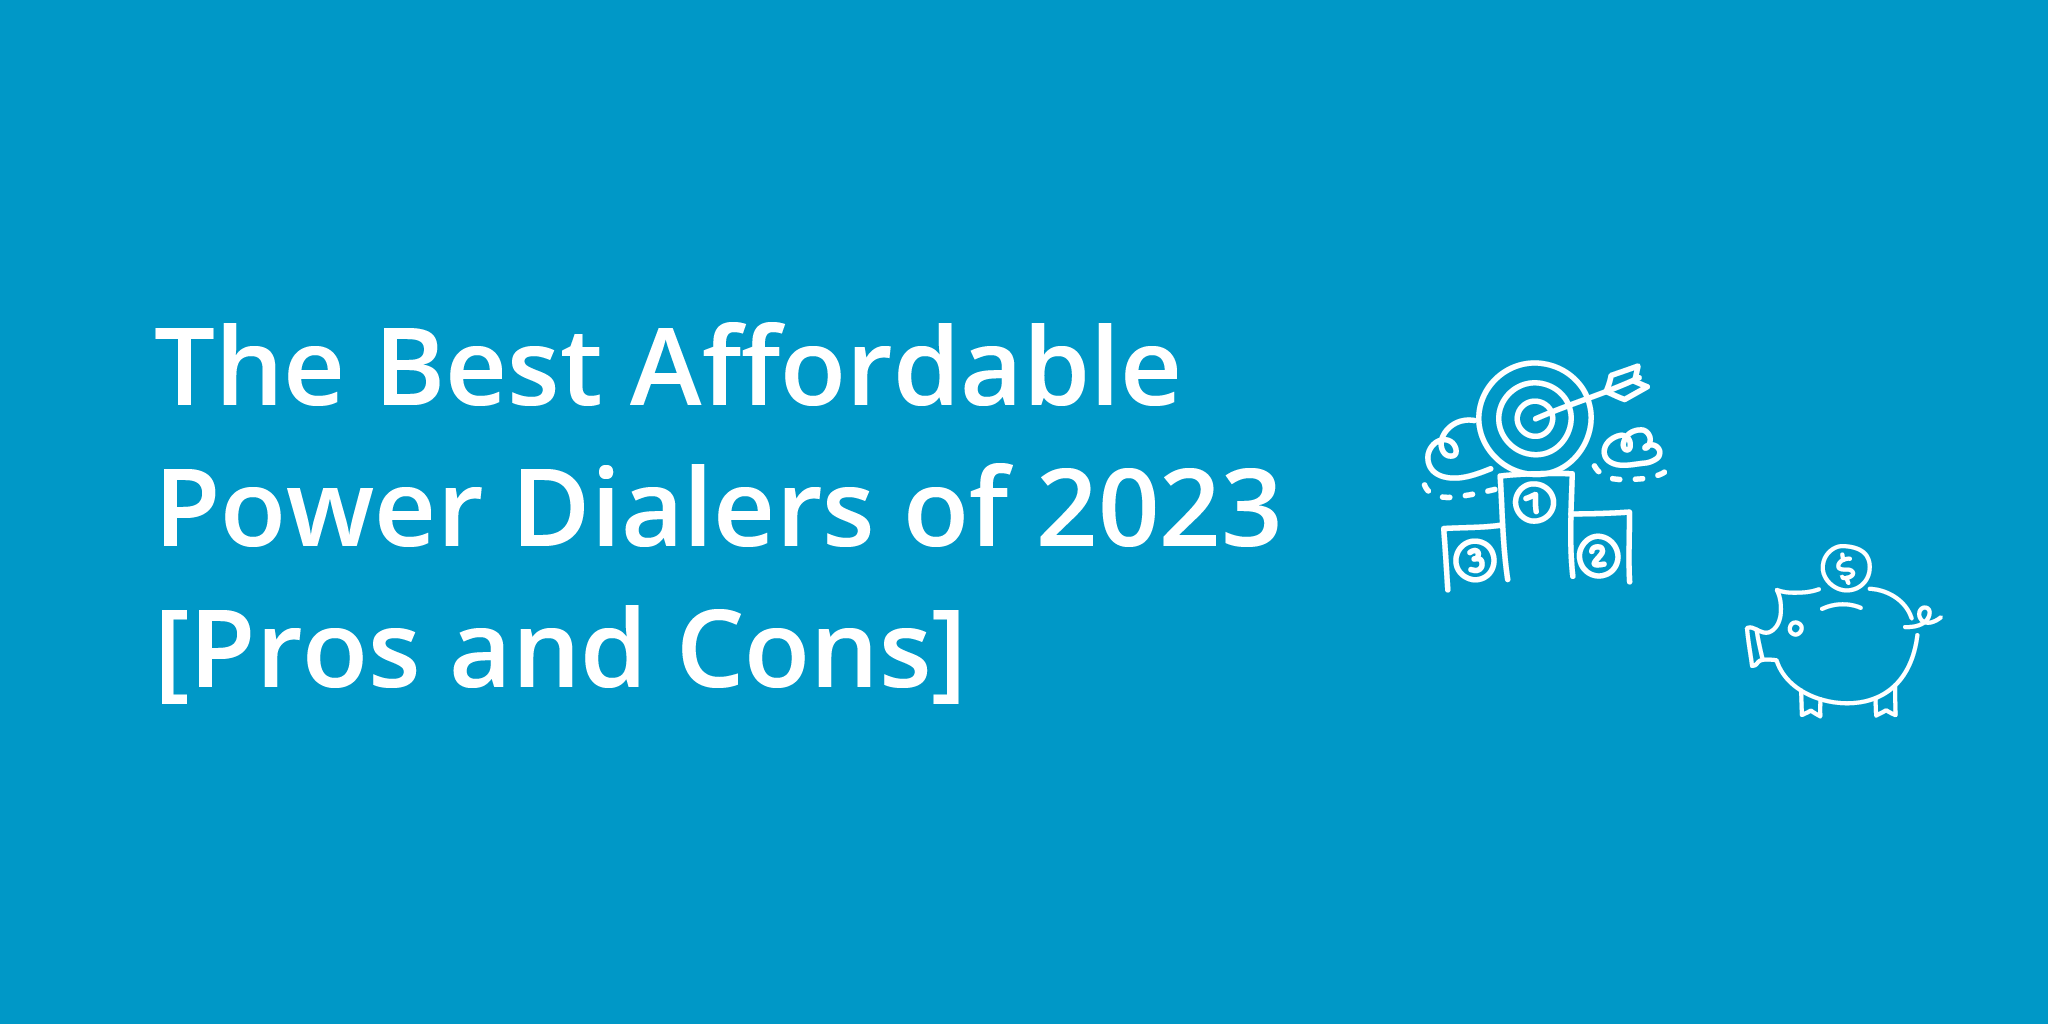 The Best Affordable Power Dialers of 2023